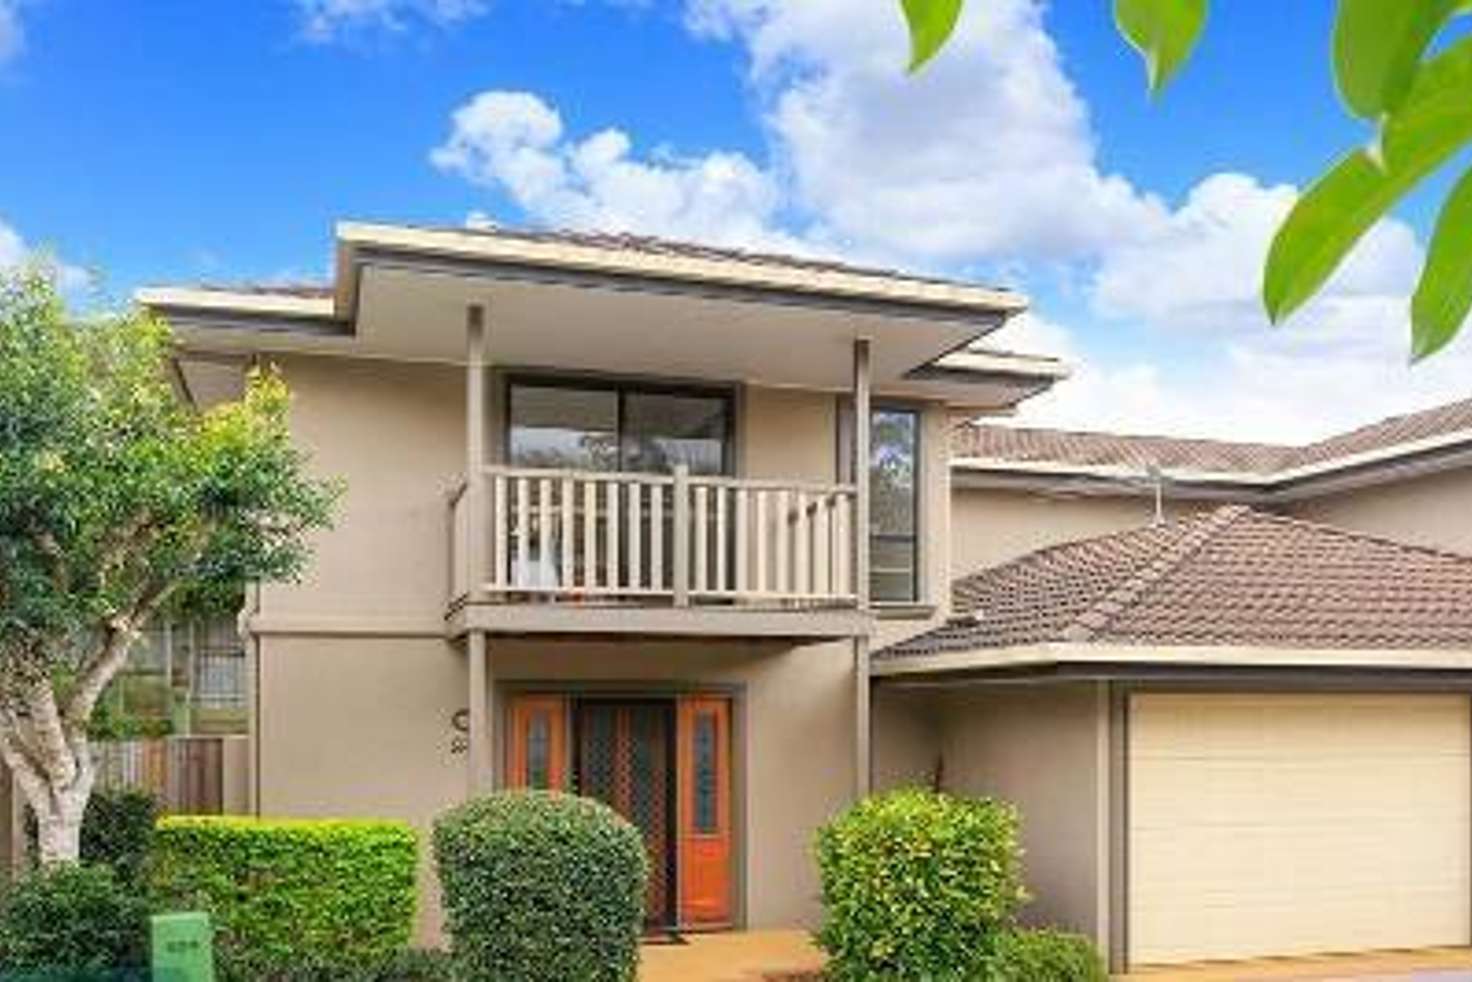 Main view of Homely townhouse listing, 24/28 Keona Rd, Mcdowall QLD 4053